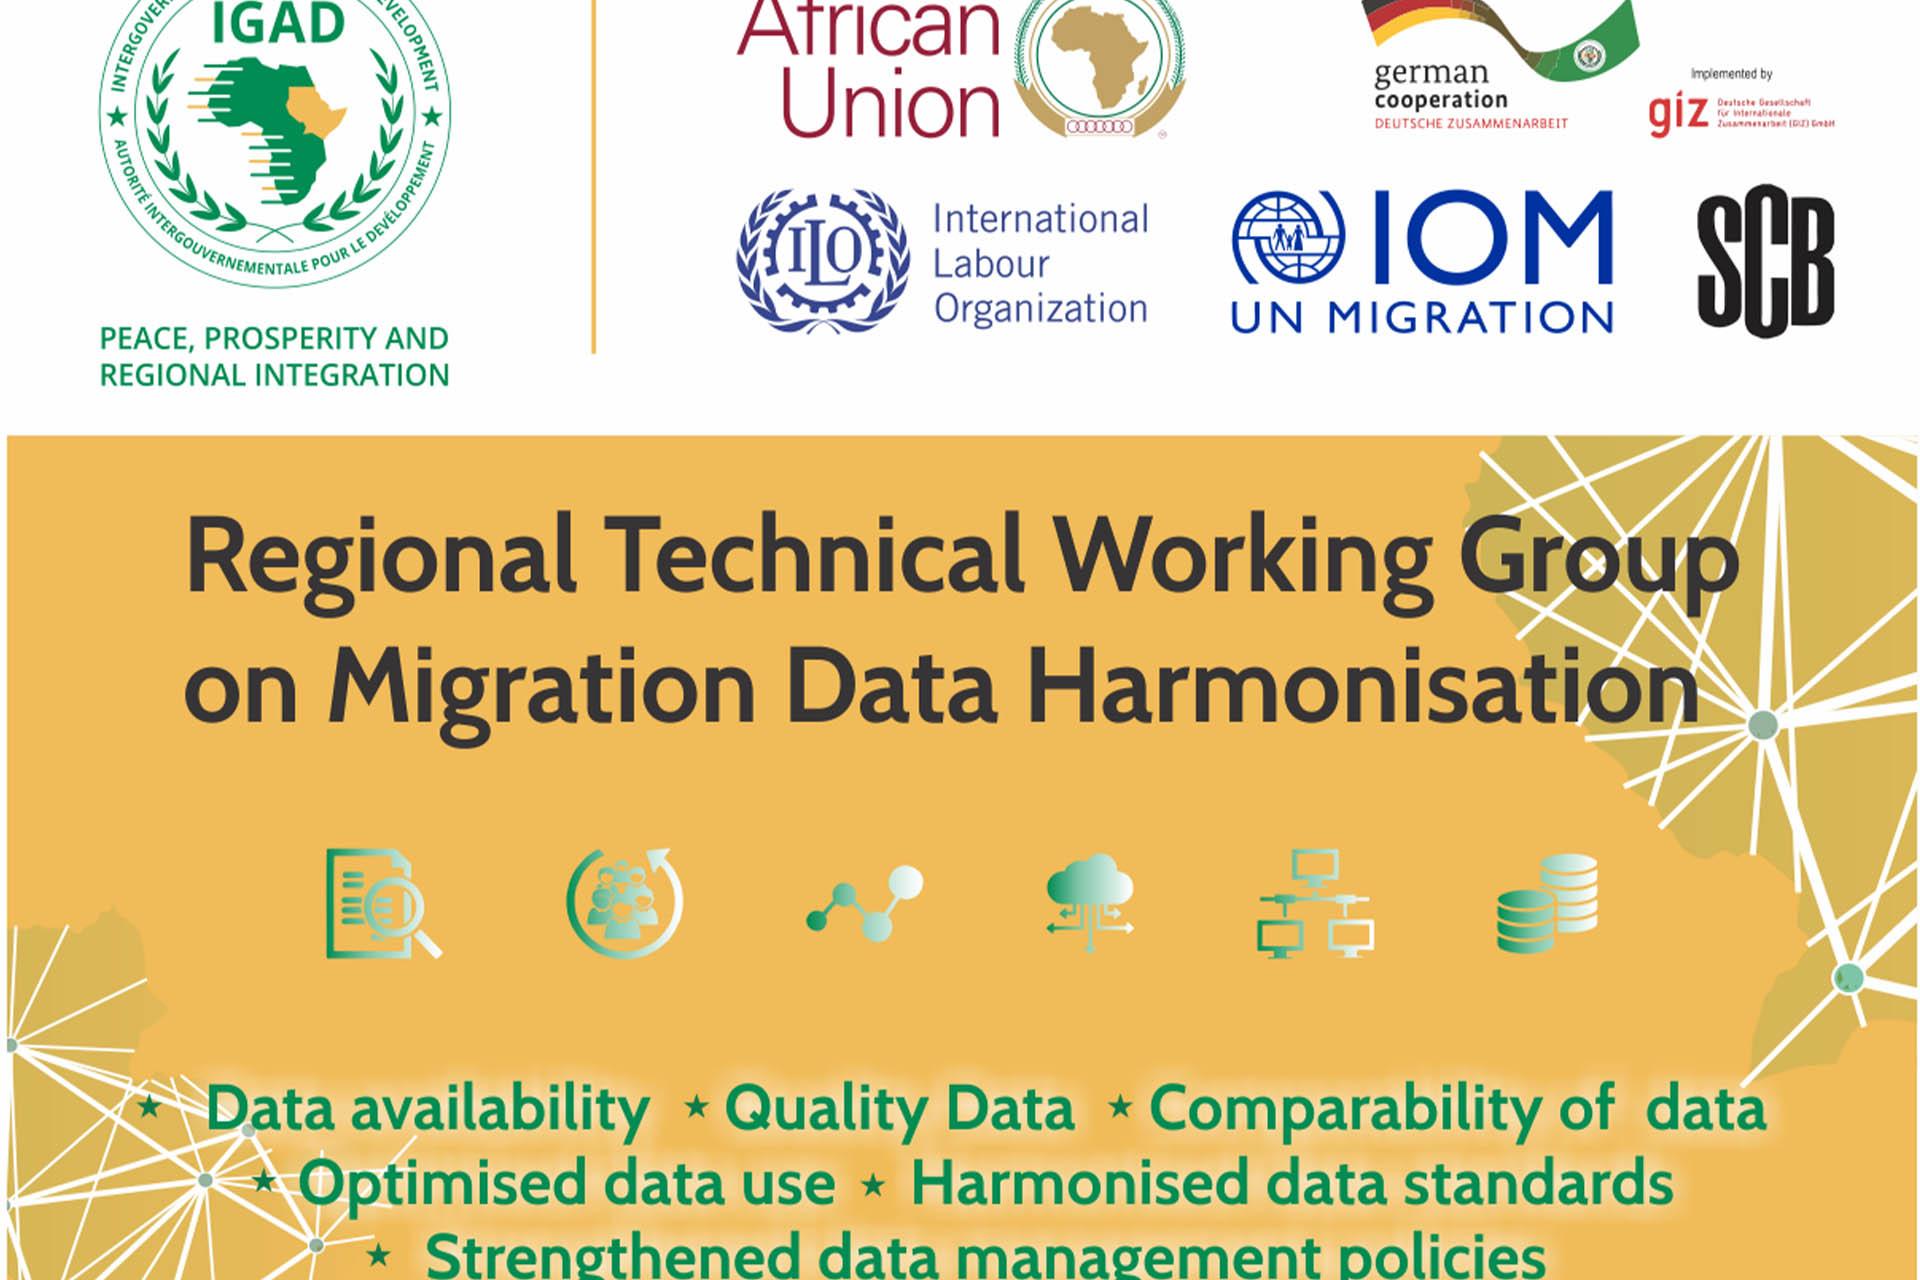 IGAD Launched Consultations With Member States on the Harmonisation of Production and Utilisation of Migration Data